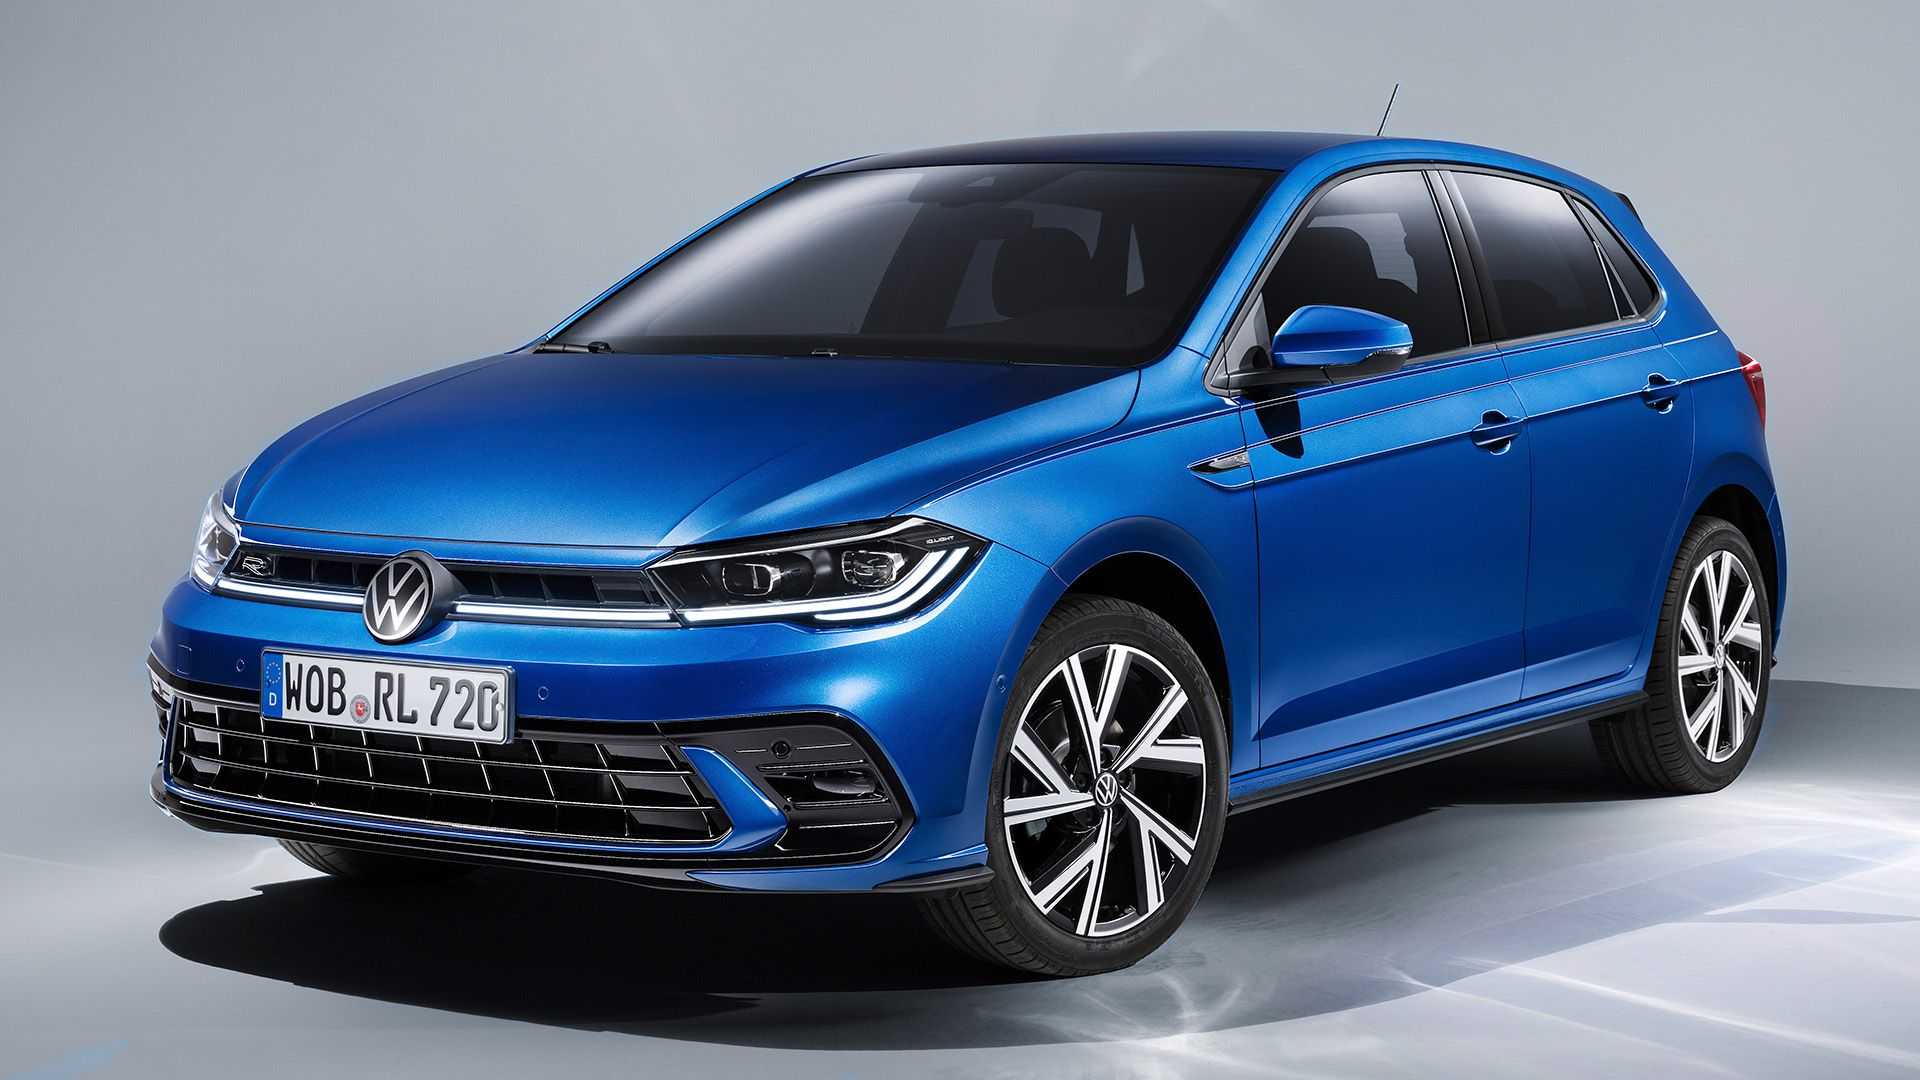 2021 Volkswagen Polo Mk6 facelift revealed - 1.0L NA and TSI, new